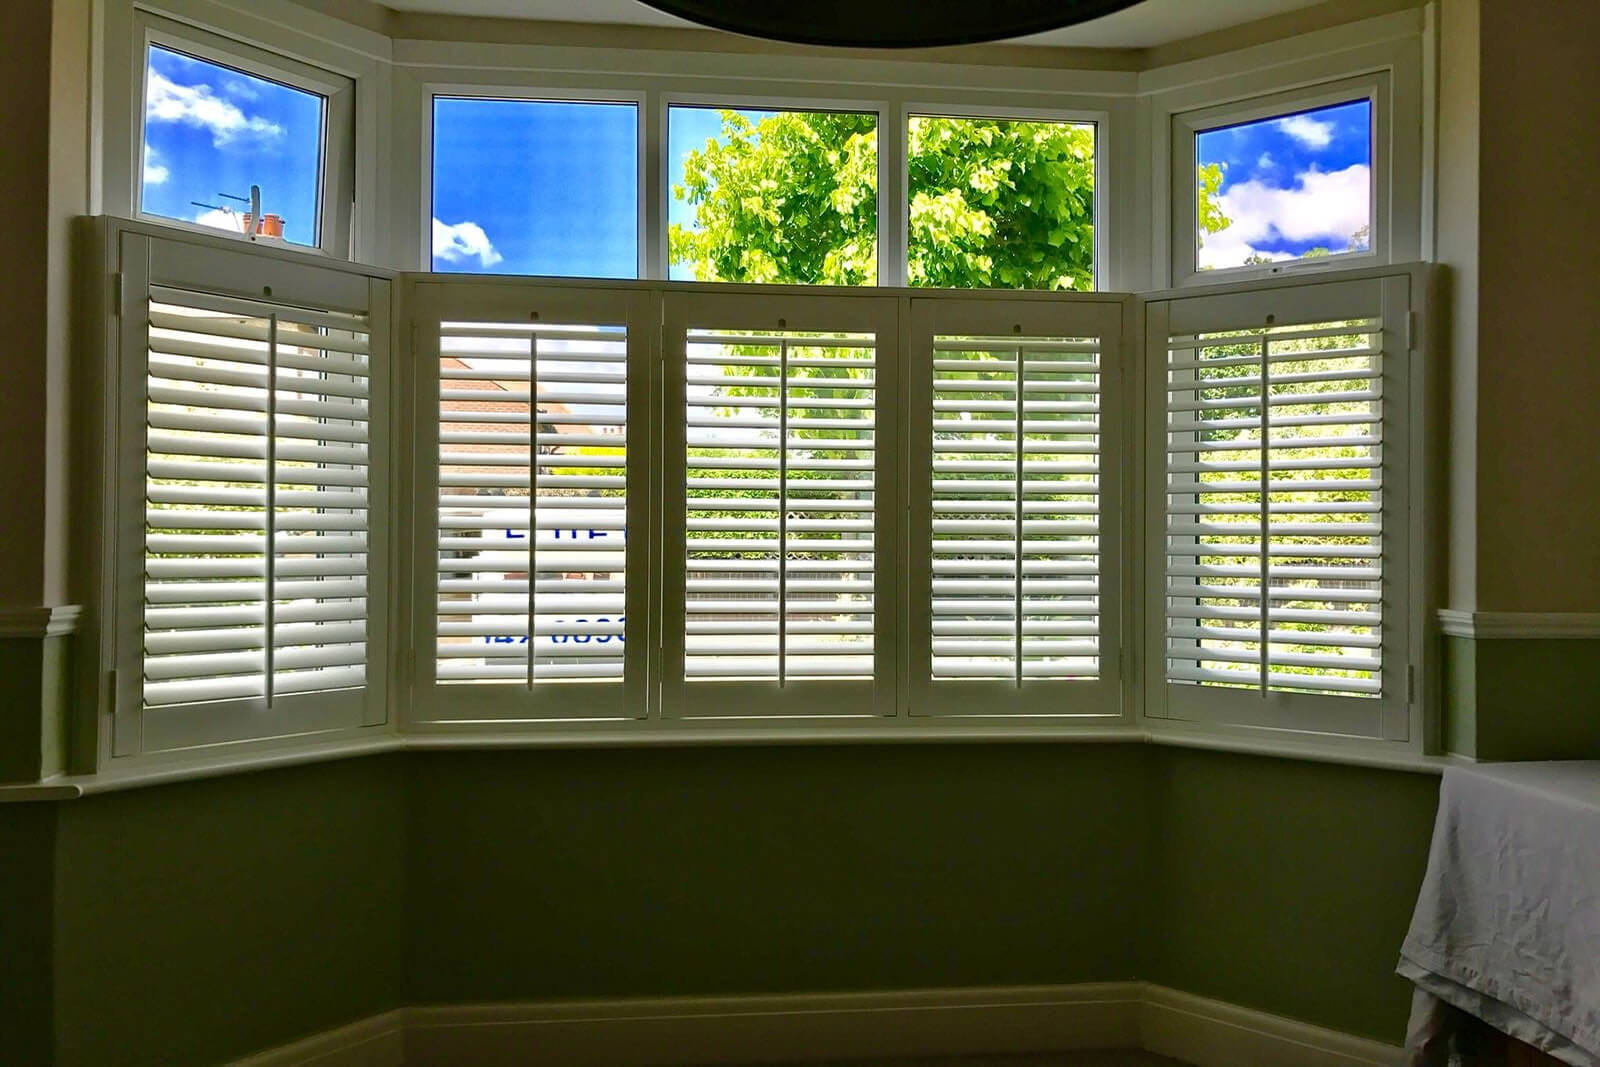 Suppliers of Stylish Plantation Shutters For Windows